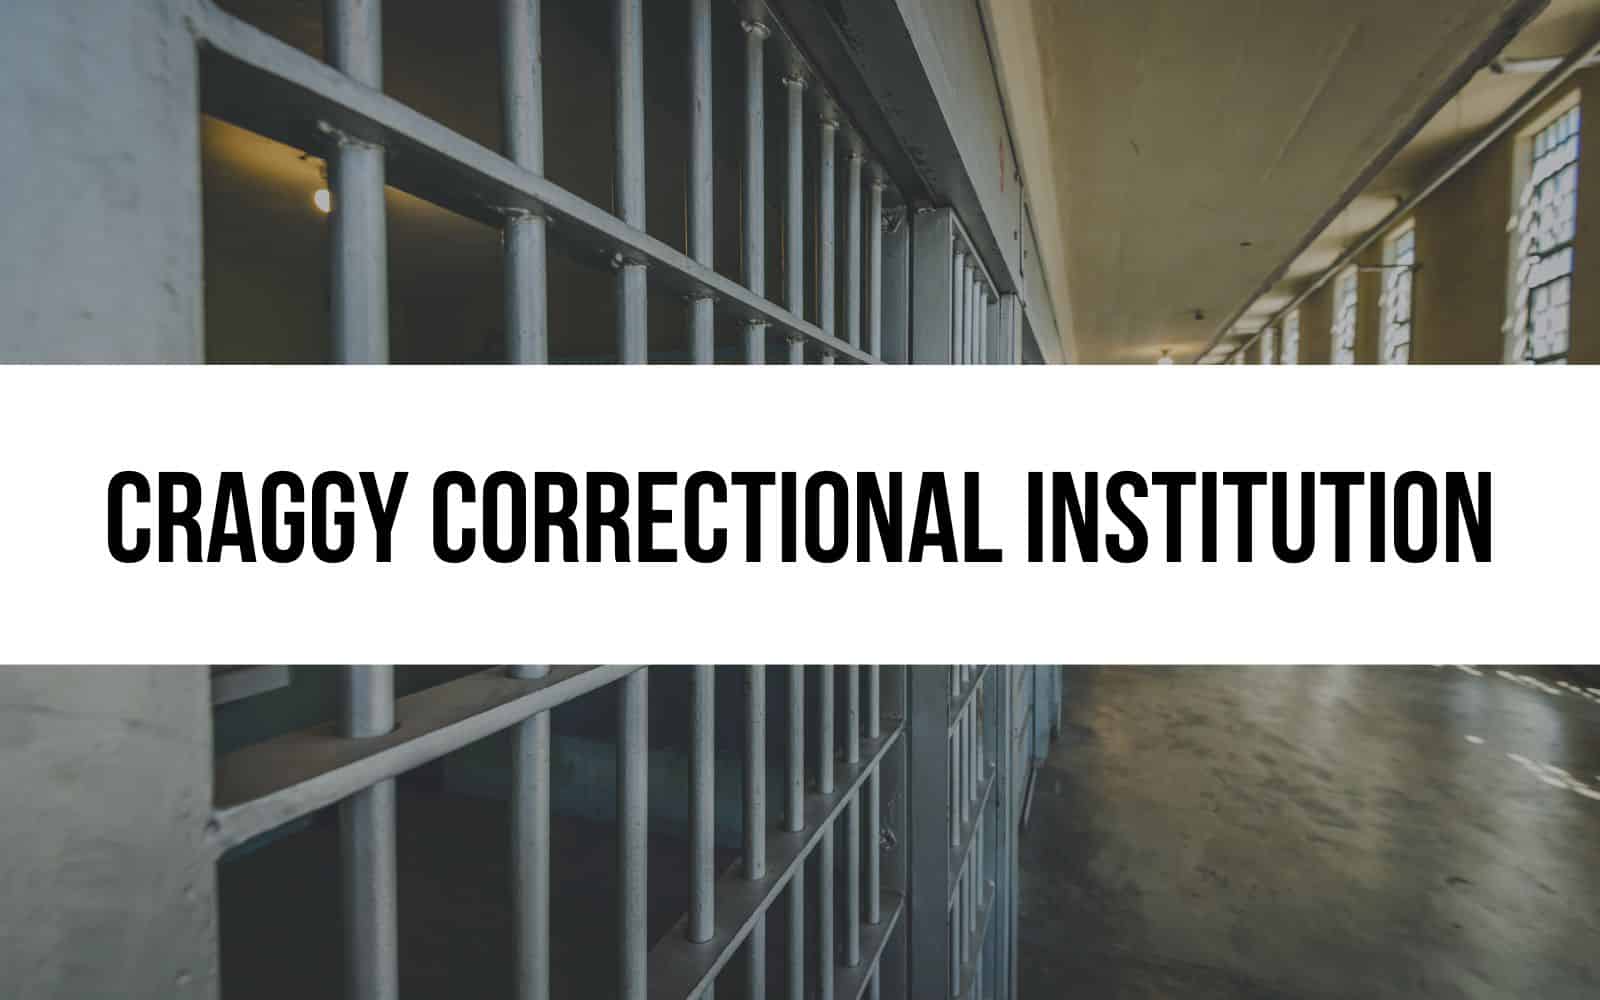 Craggy Correctional Institution